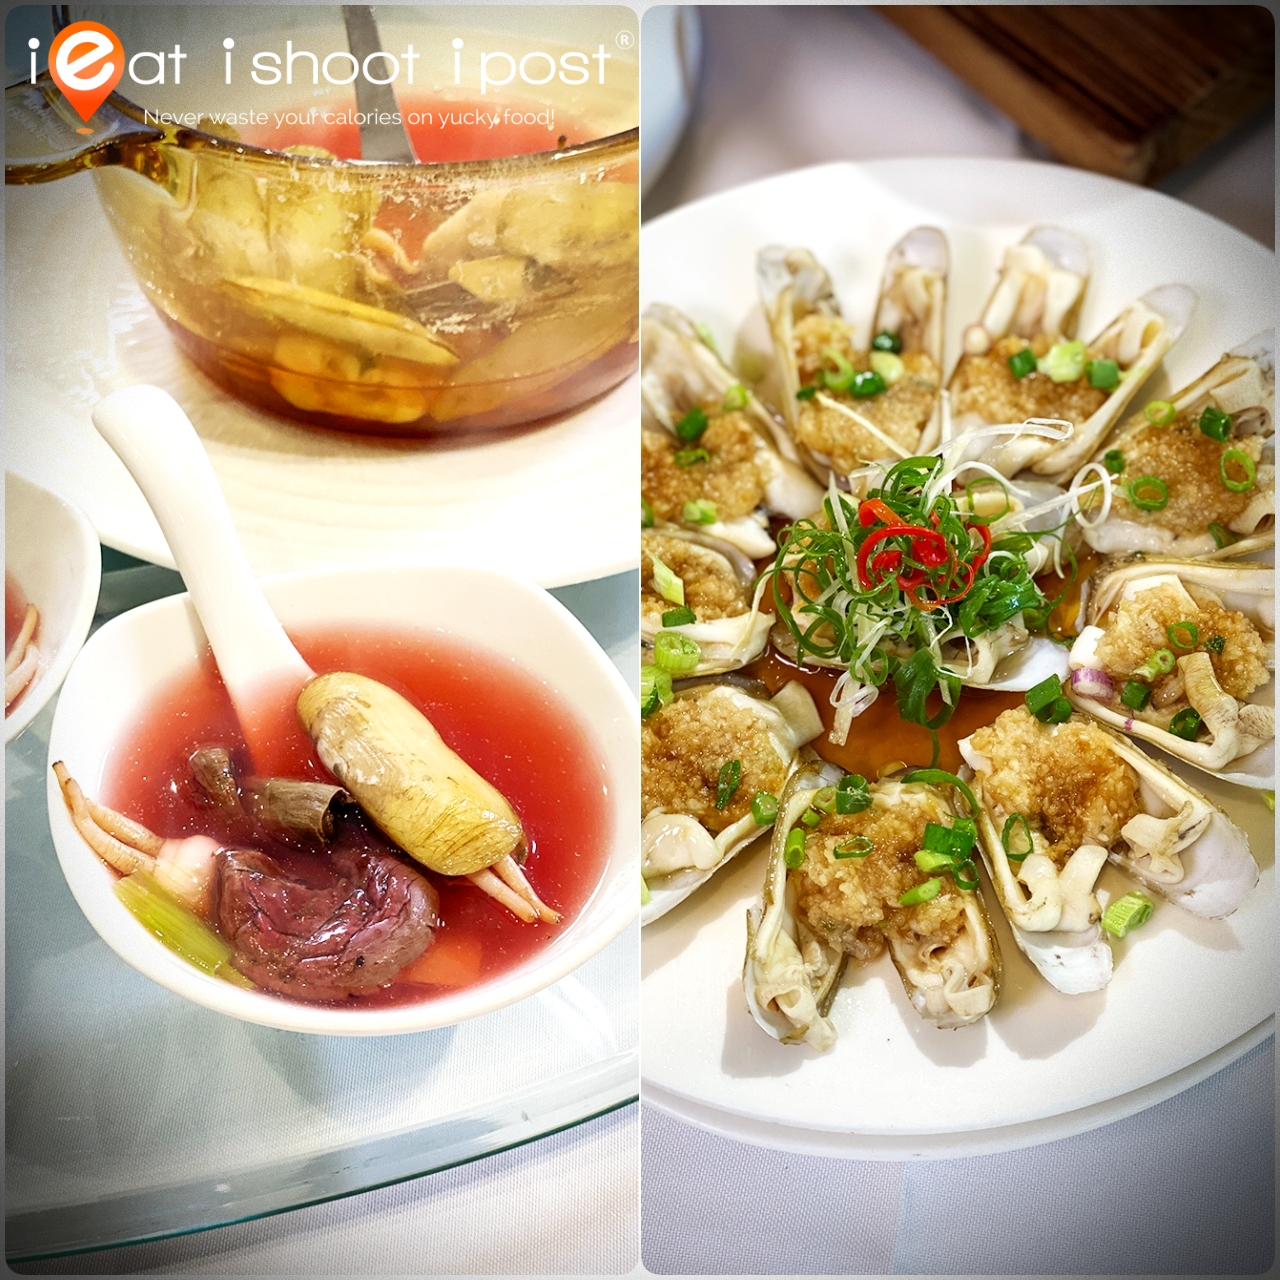 Red Mushroom Duotou Clam Soup, $28.80 Steamed Duotou Clams with Minced Garlic $26.80